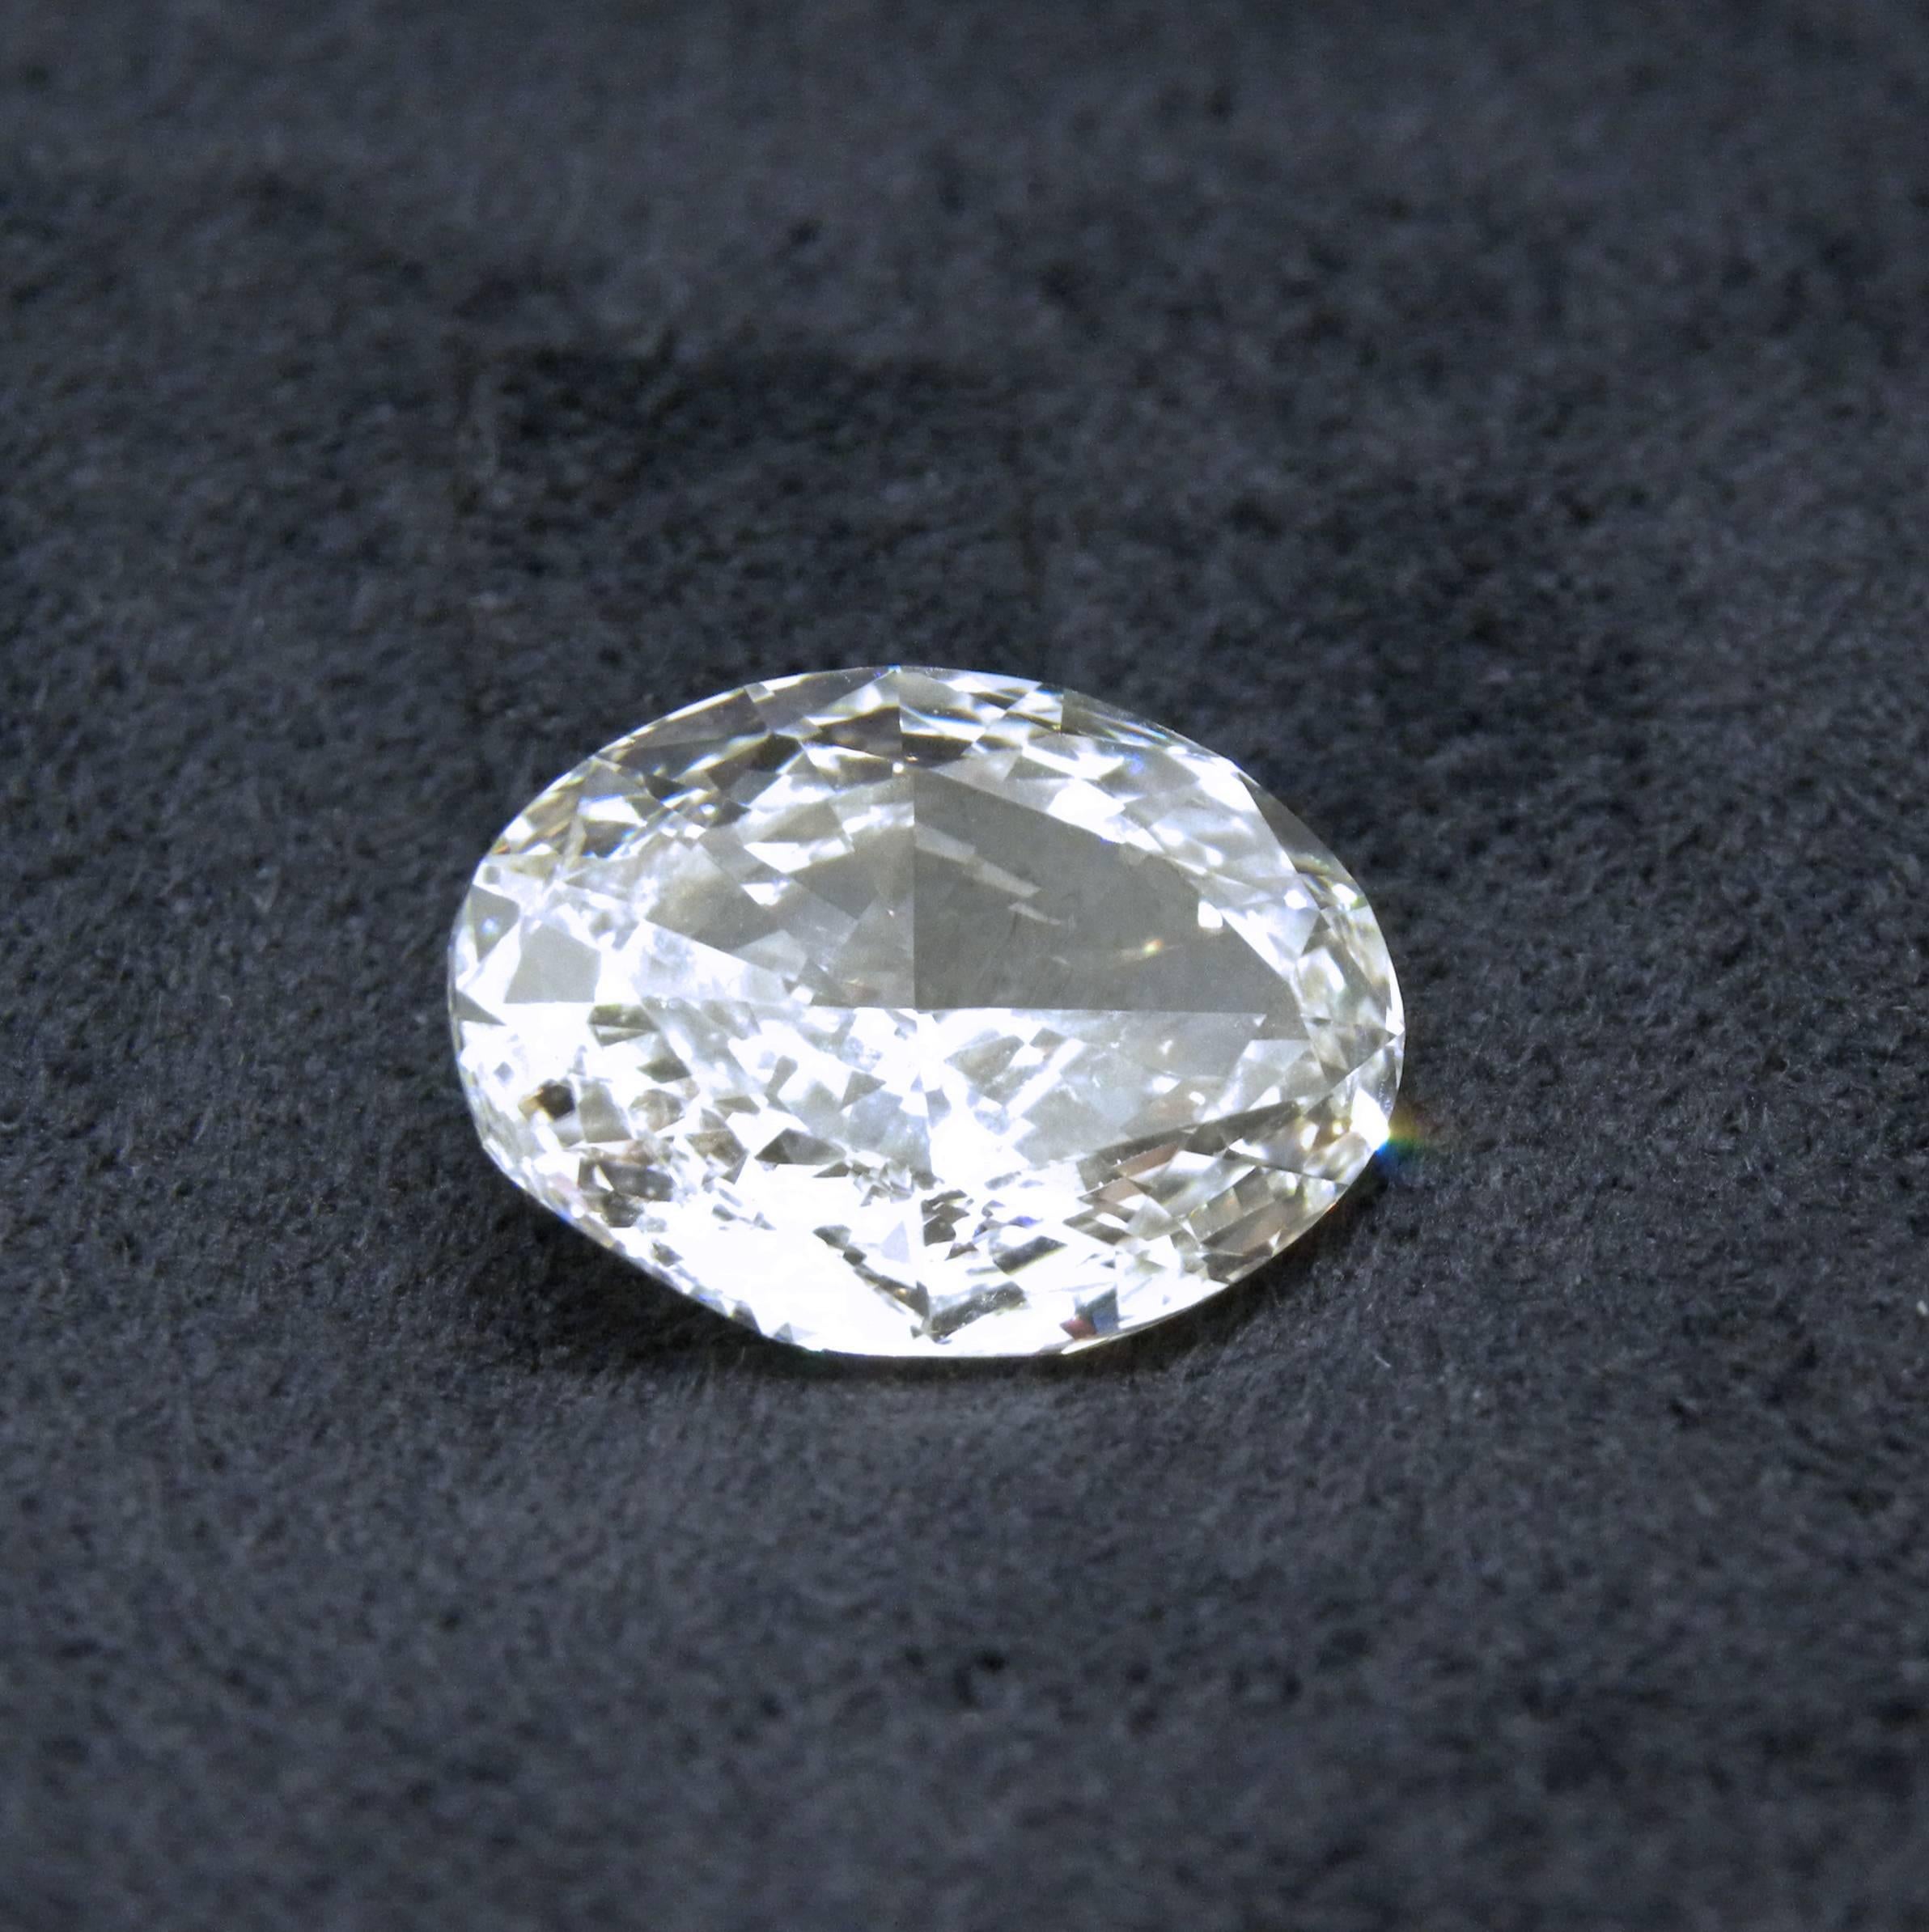 HRD Certified Natural 5.01 Carat H IF Oval Cut White Diamond 4